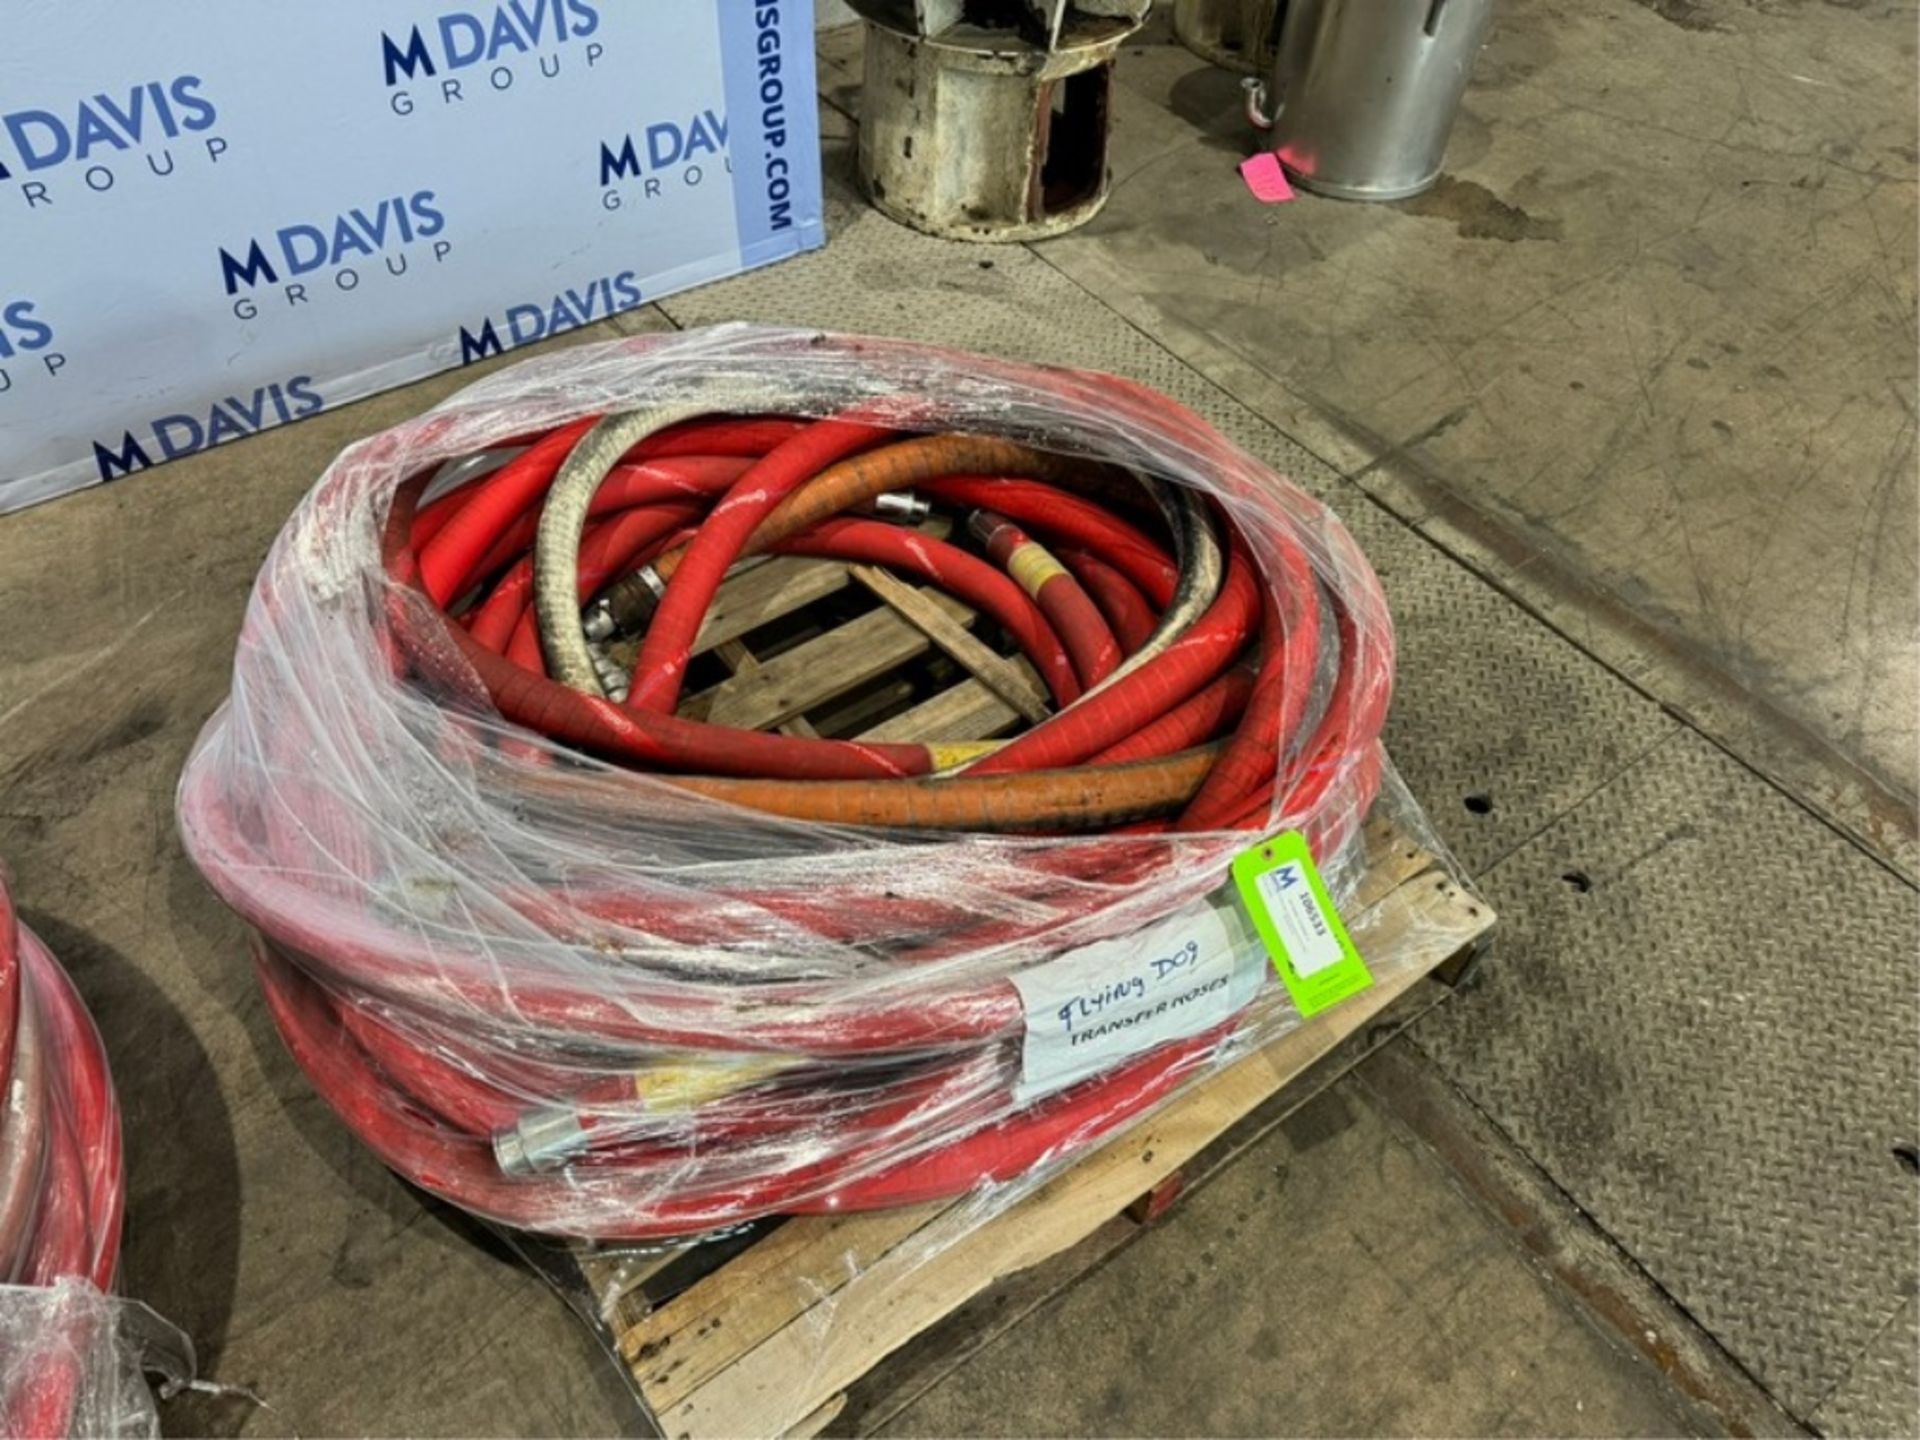 Assorted Transfer Hoses, Assorted Lengths, with Aprox. 1-1/2" Clamp Type Ends (NOTE: Stretch Wrapped